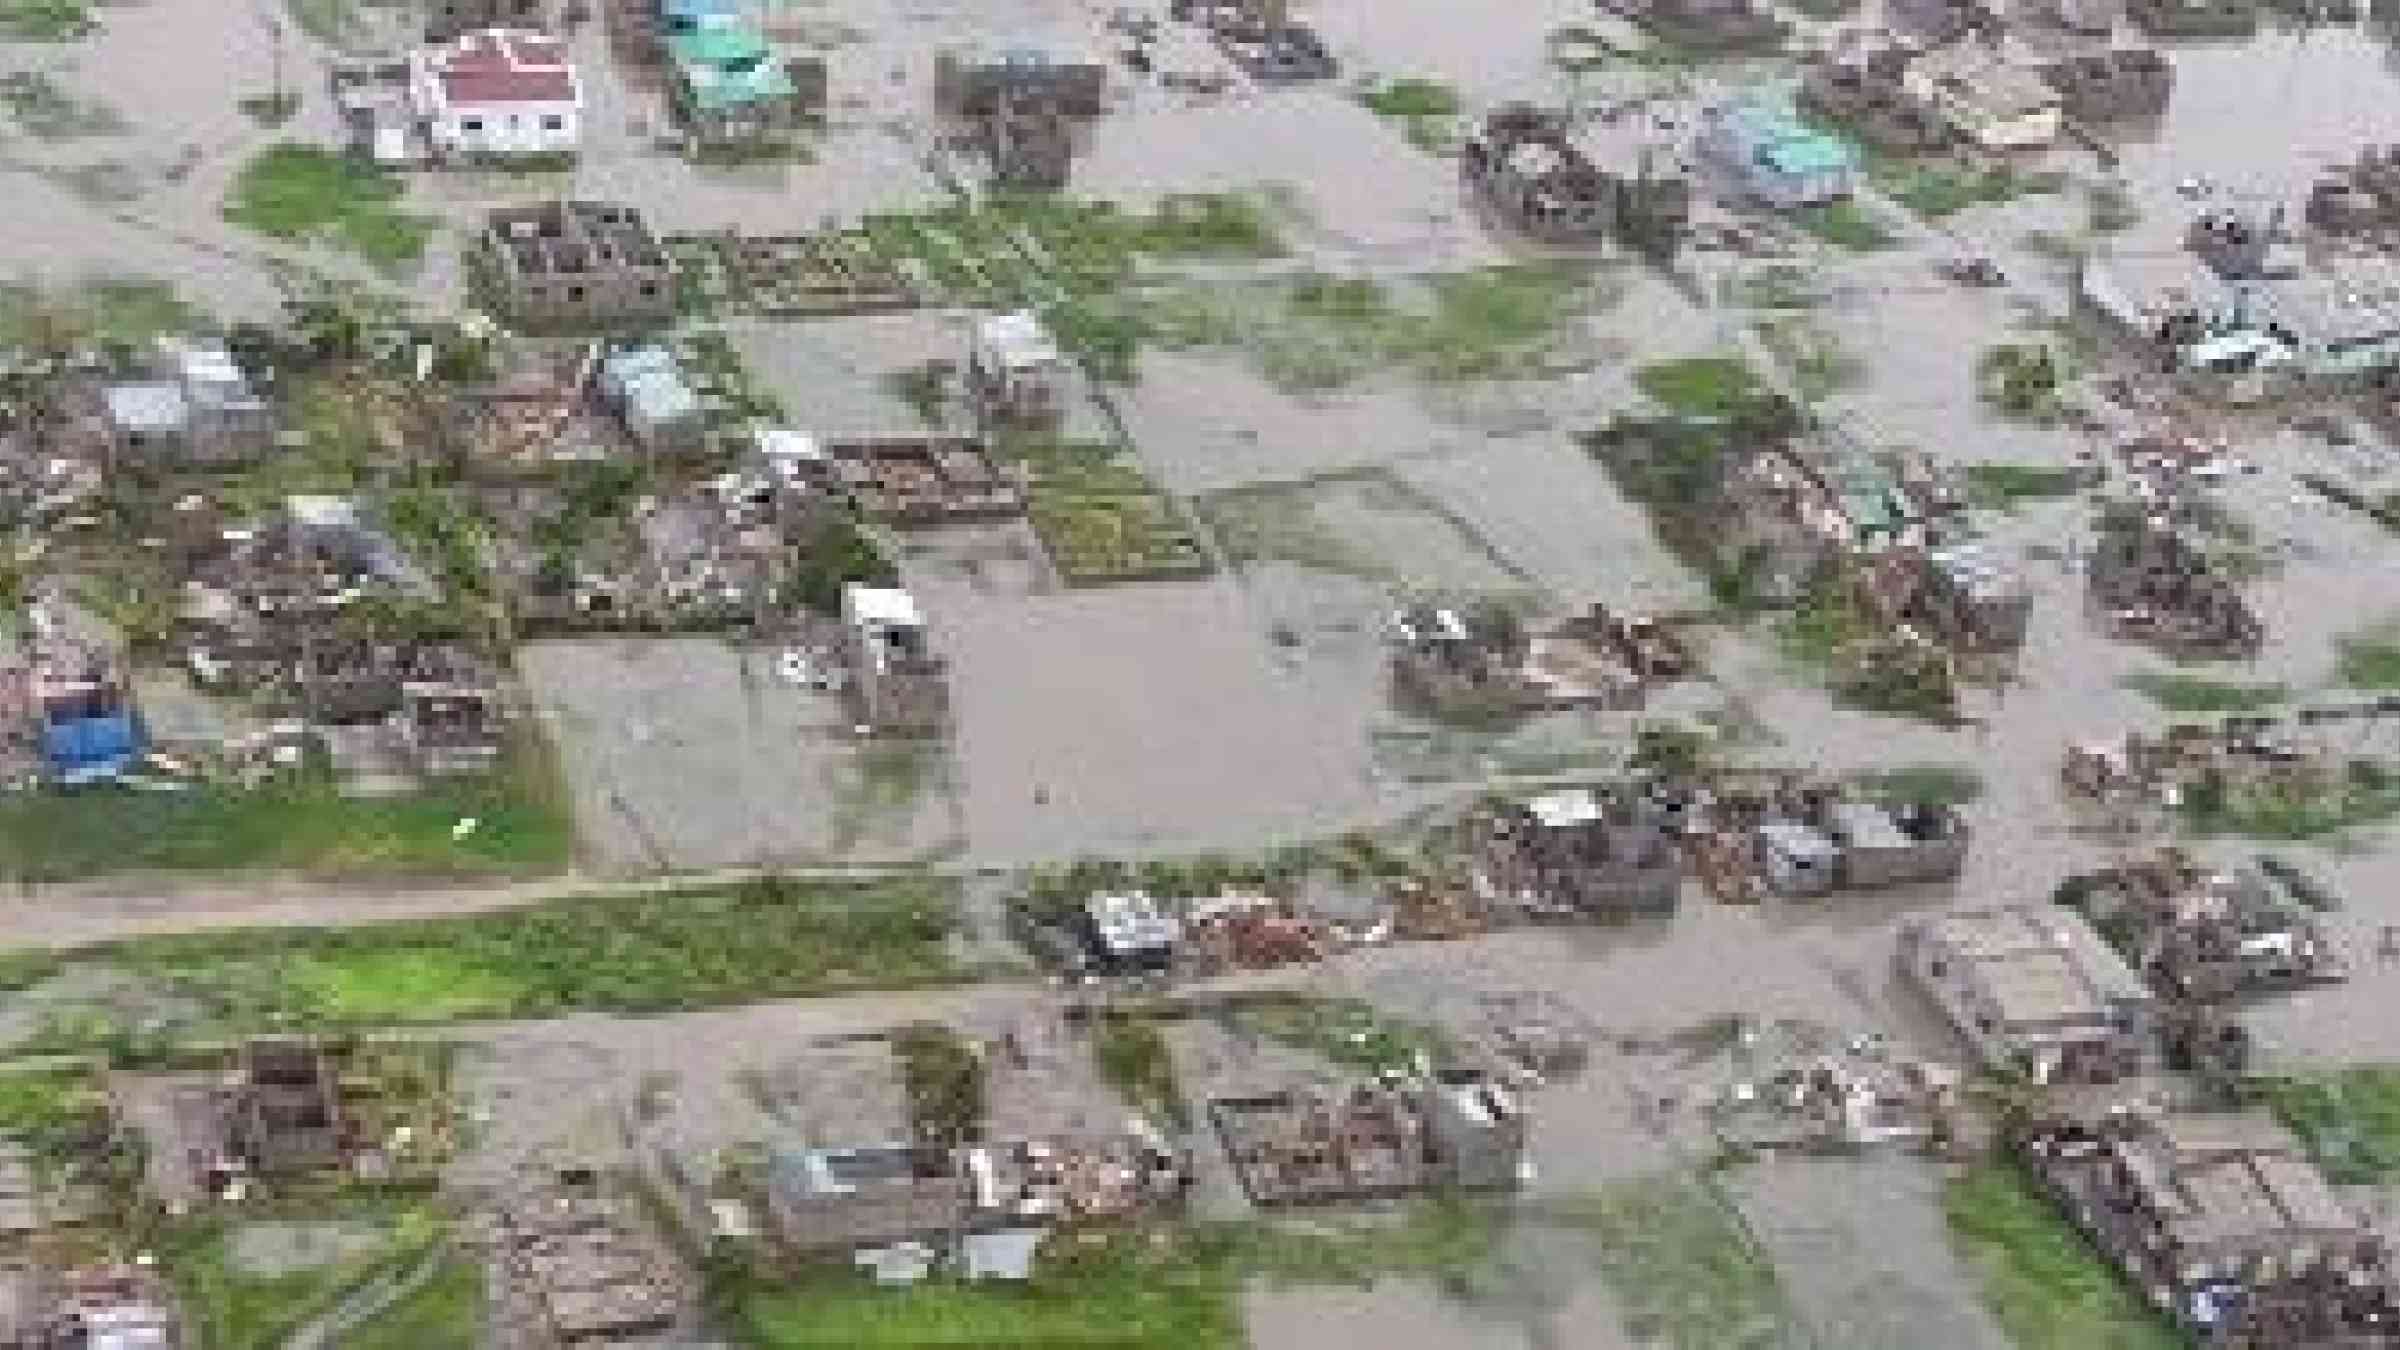 An aerial view of the devastation in Beira, taken by an IFRC emergency assessment team